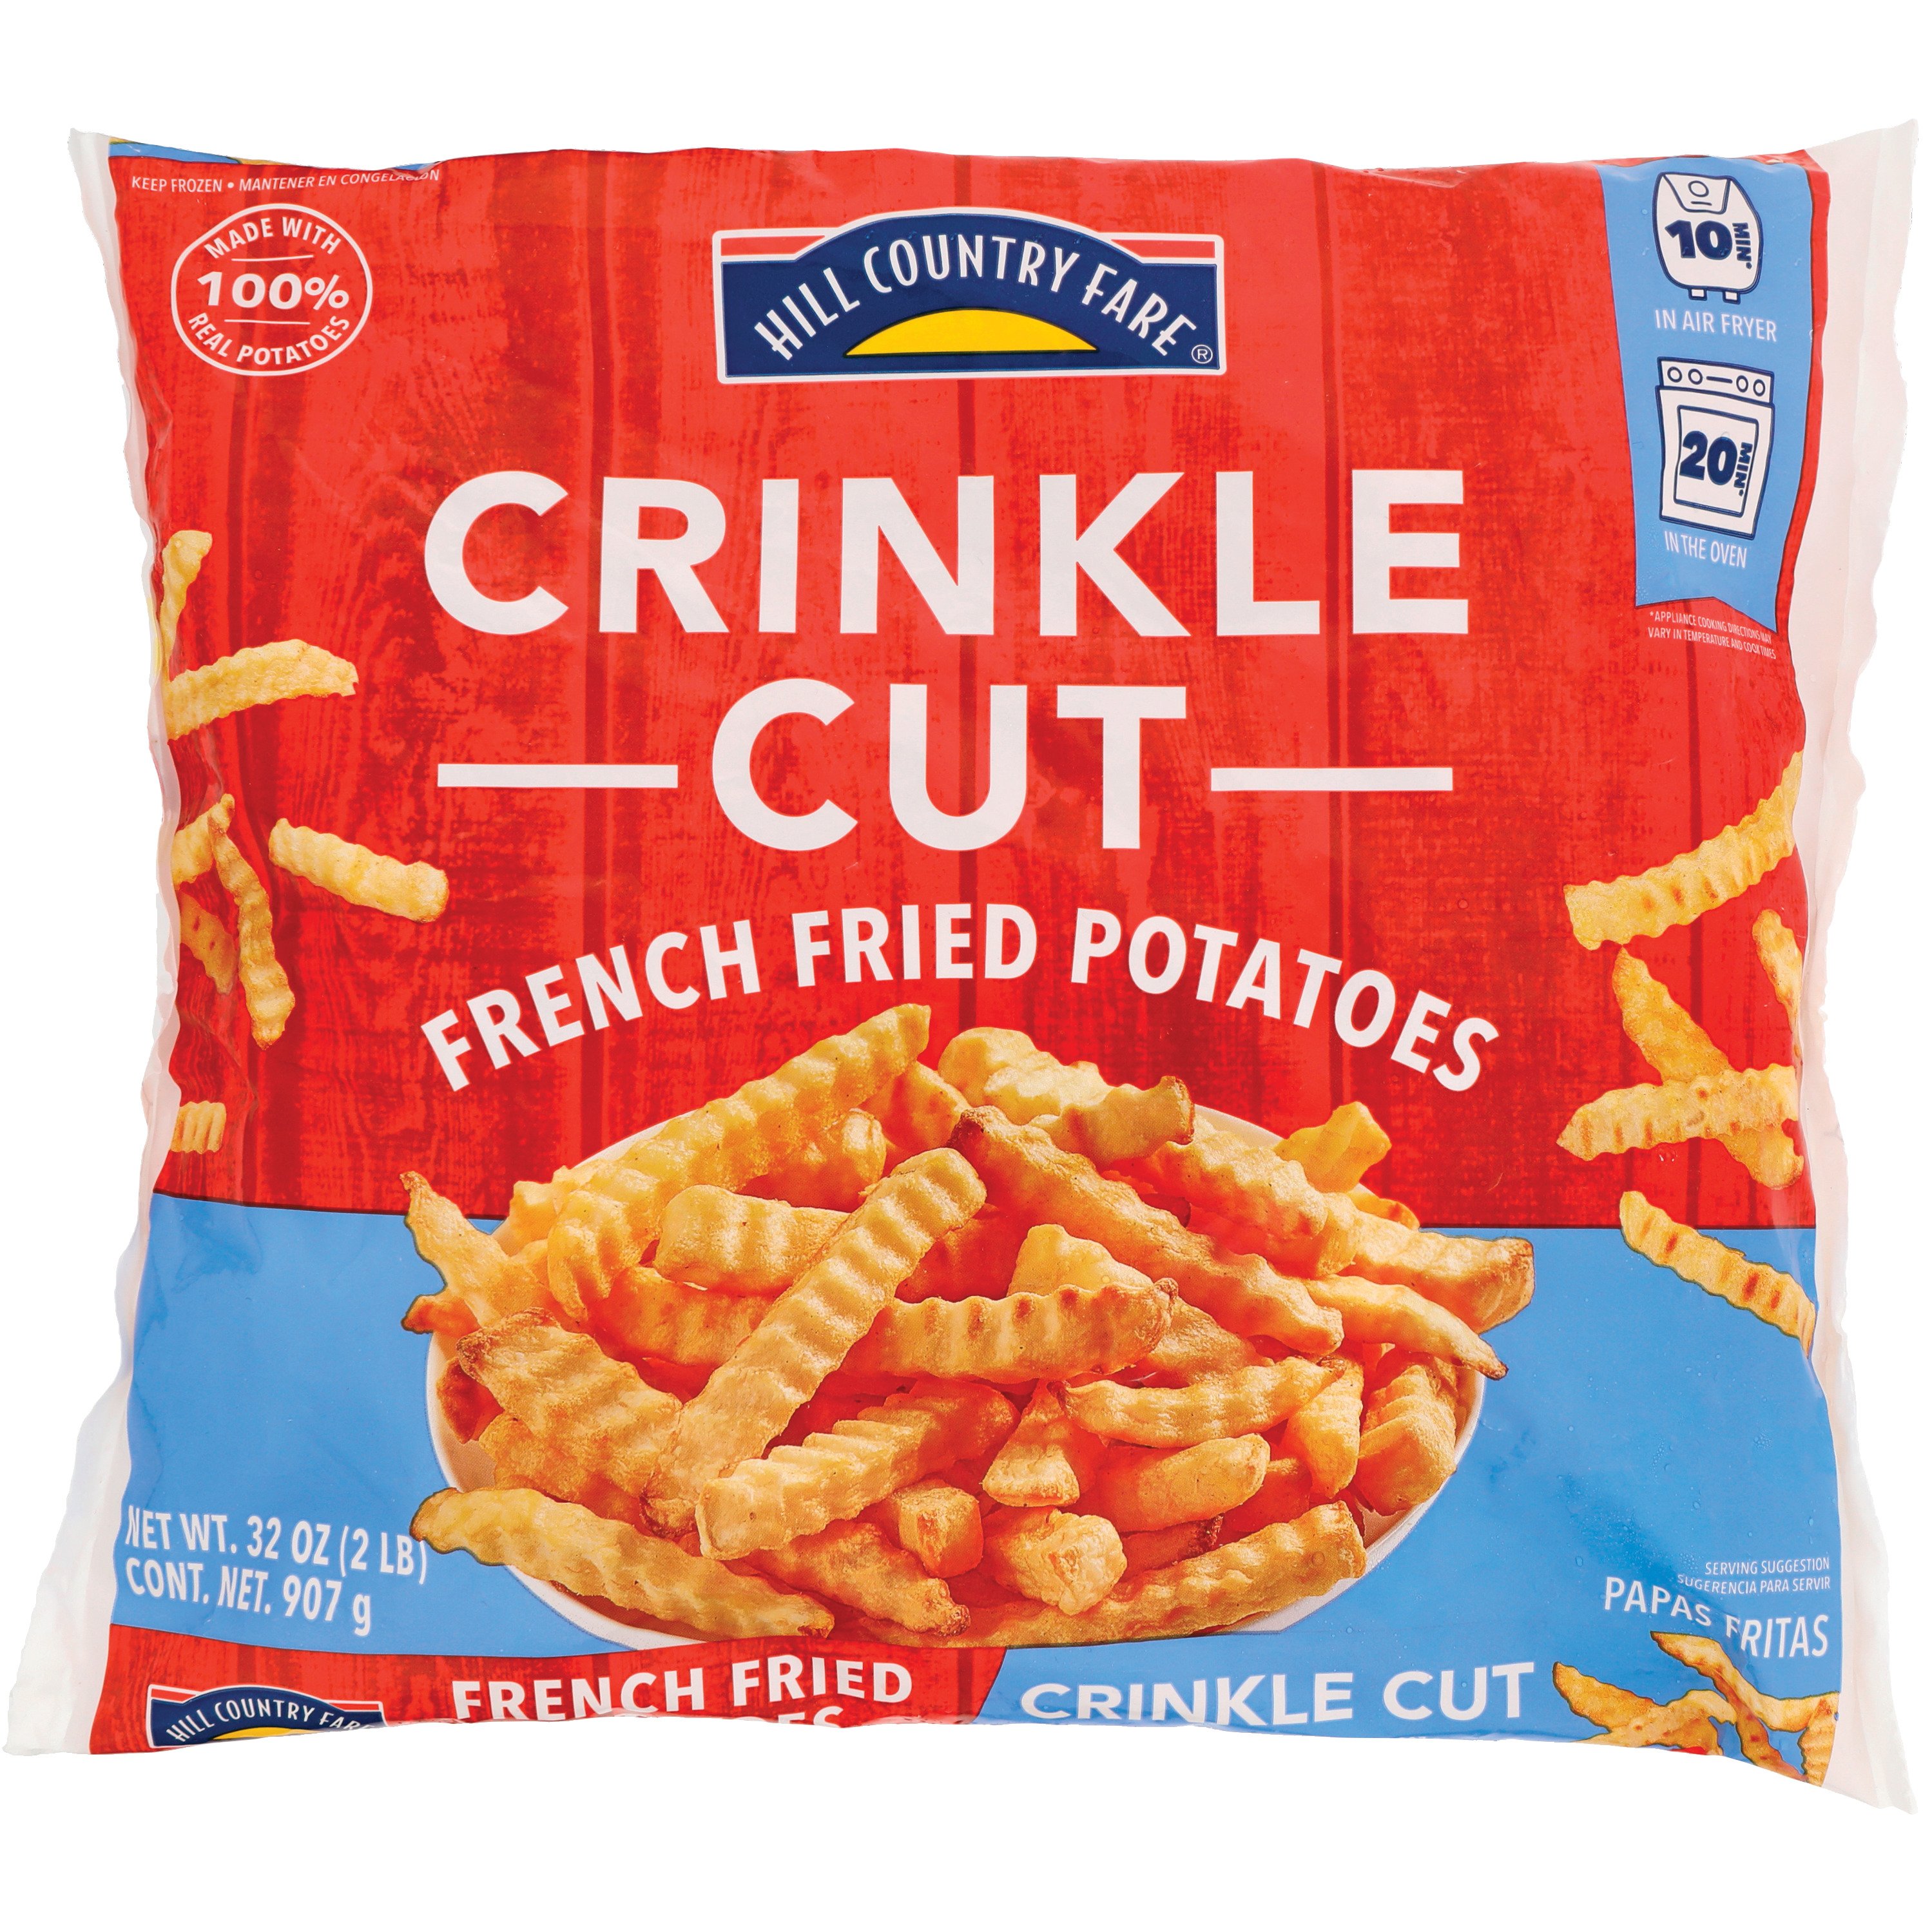 Hill Country Fare Frozen Crinkle Cut French Fries - Shop Entrees & Sides at  H-E-B